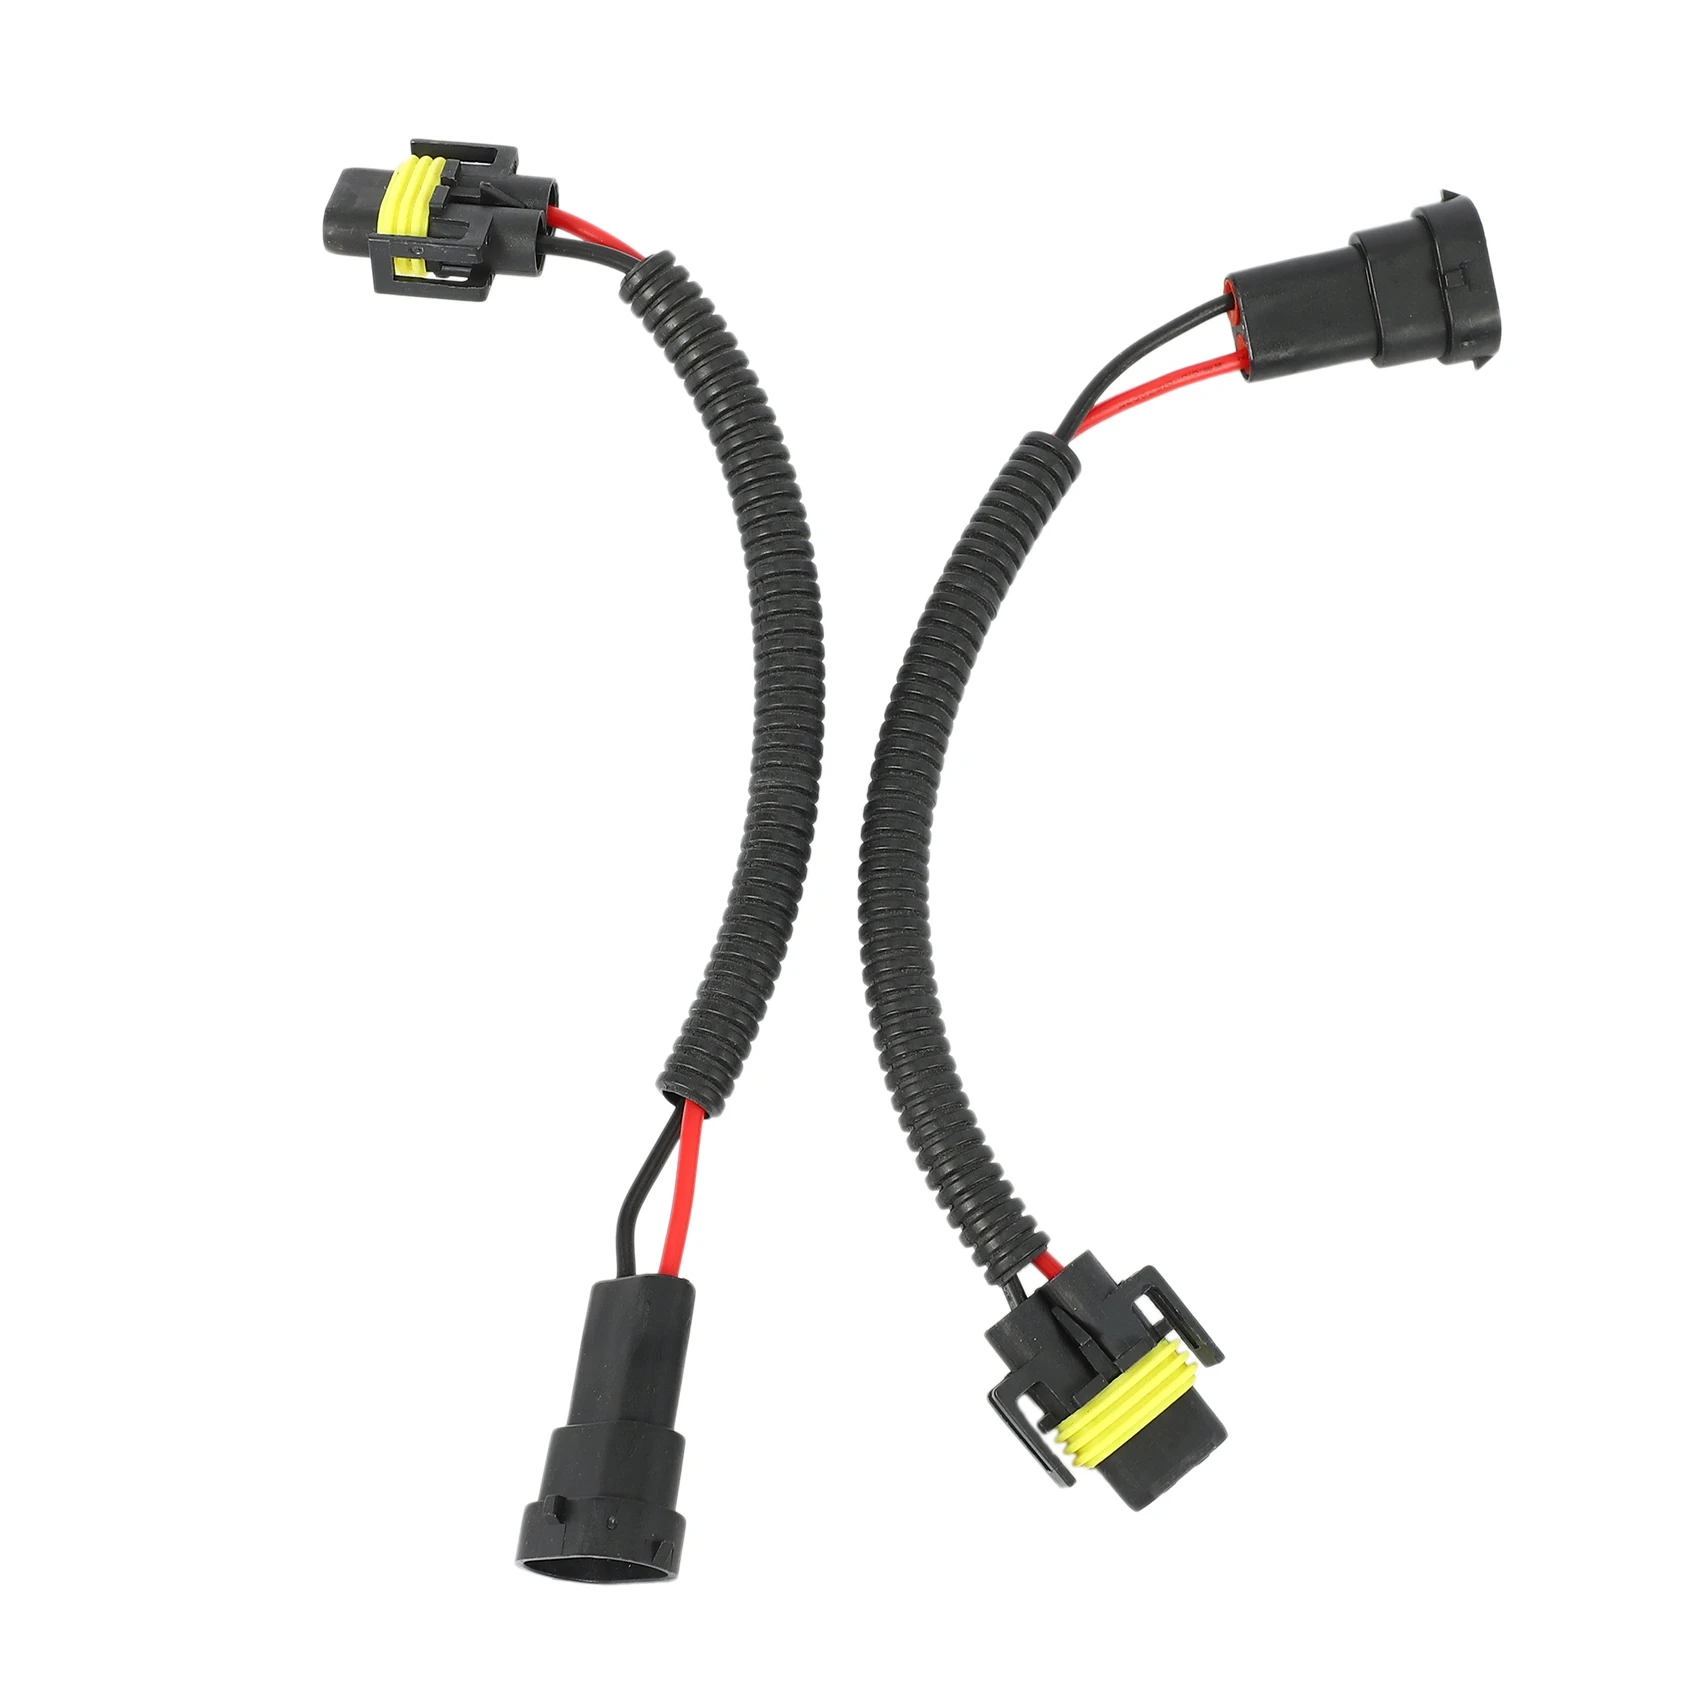 

2Pcs 9006 To H11 H8 Headlight Fog Light Conversion Connector Wiring Harness Plug Cable Socket Connector Repair Kit